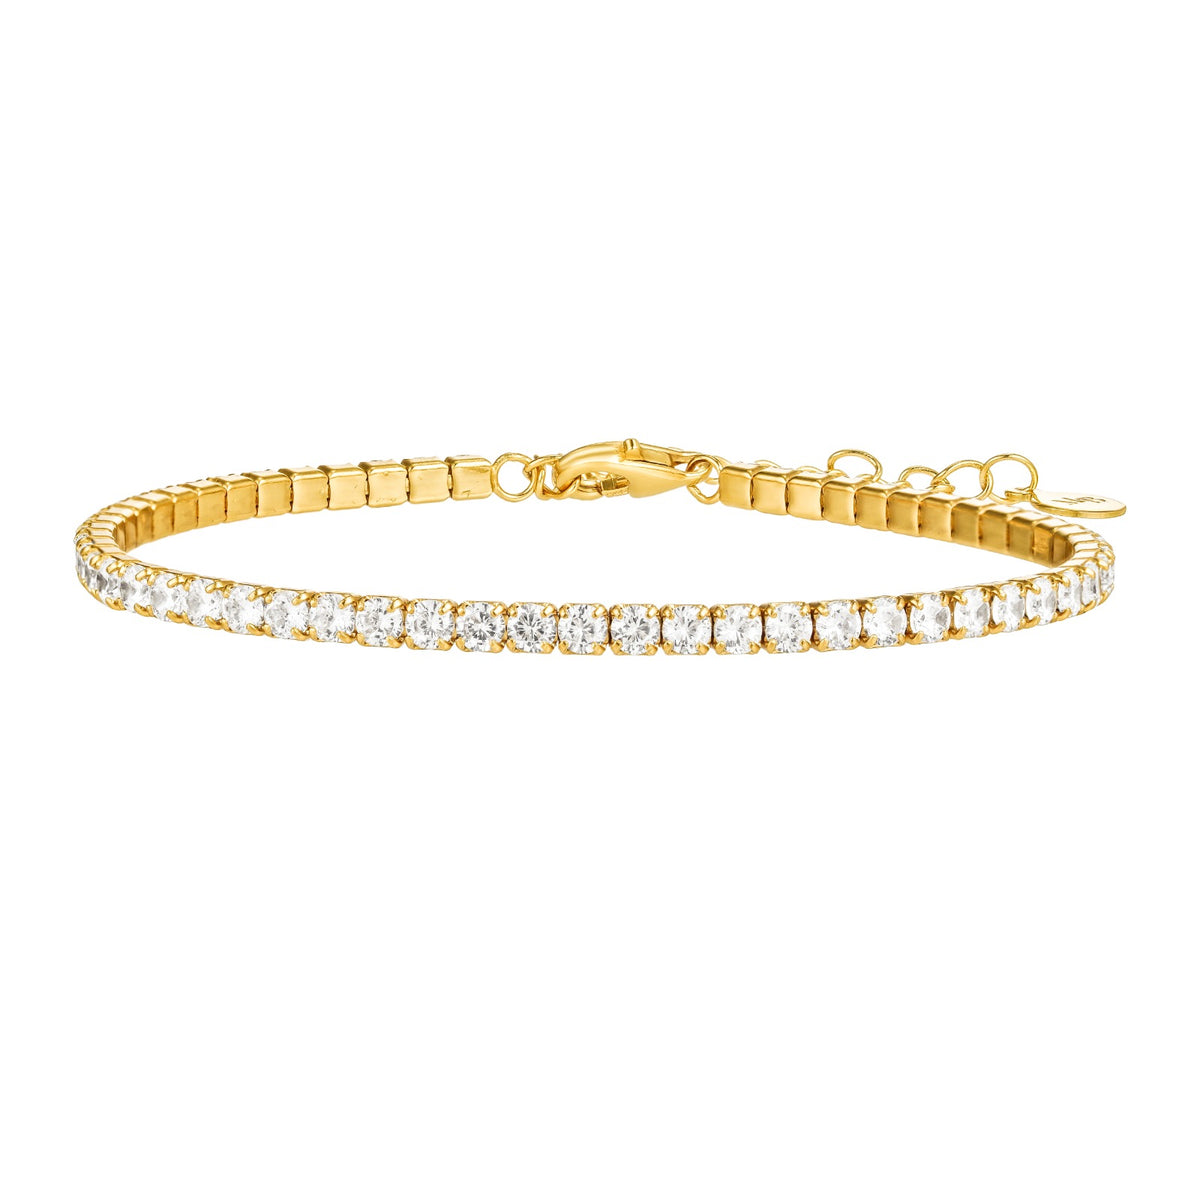 Crafted with meticulous precision, the Billie Tennis Bracelet showcases a seamless row of meticulously set gemstones that radiate brilliance and sparkle. Each stone, like a perfectly struck tennis ball, captures the essence of Billie Jean King's unwavering focus and unwavering determination on the court.